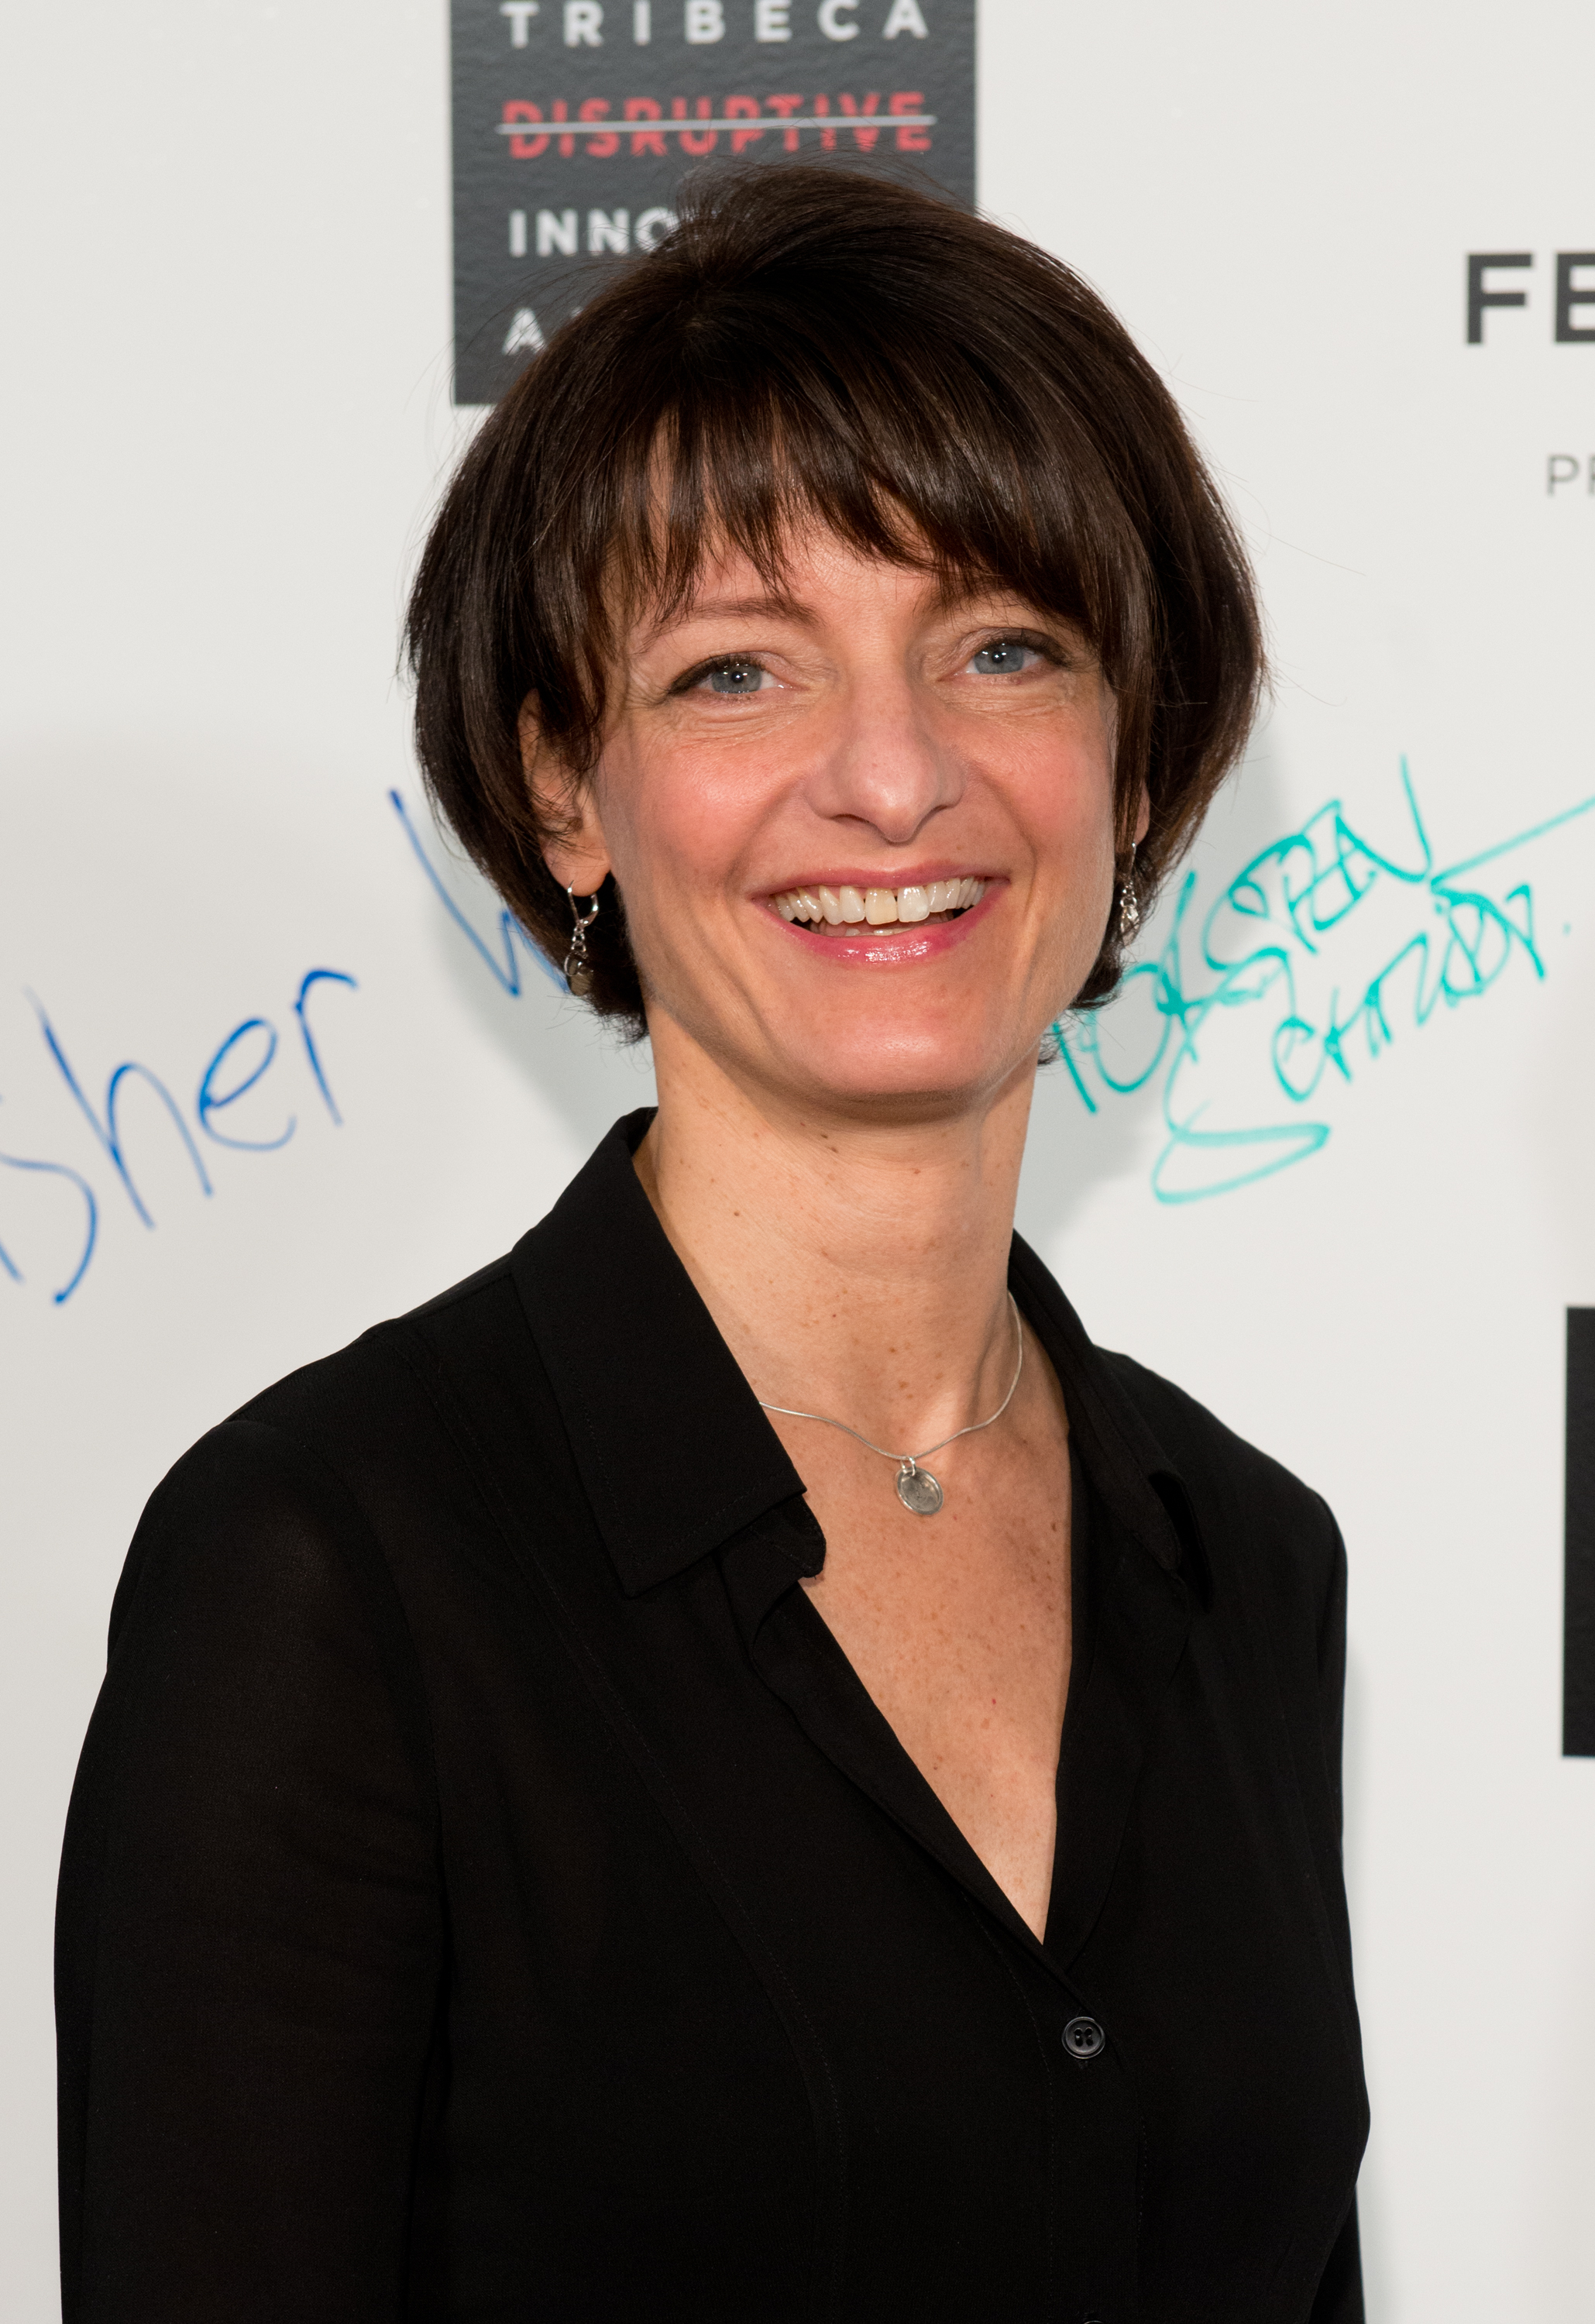 Regina Dugan attends The Disruptive Innovation Awards during the 2014 Tribeca Film Festival at Jack H. Skirball Center for the Performing Arts on April 25, 2014 in New York City. (Noam Galai—WireImage)